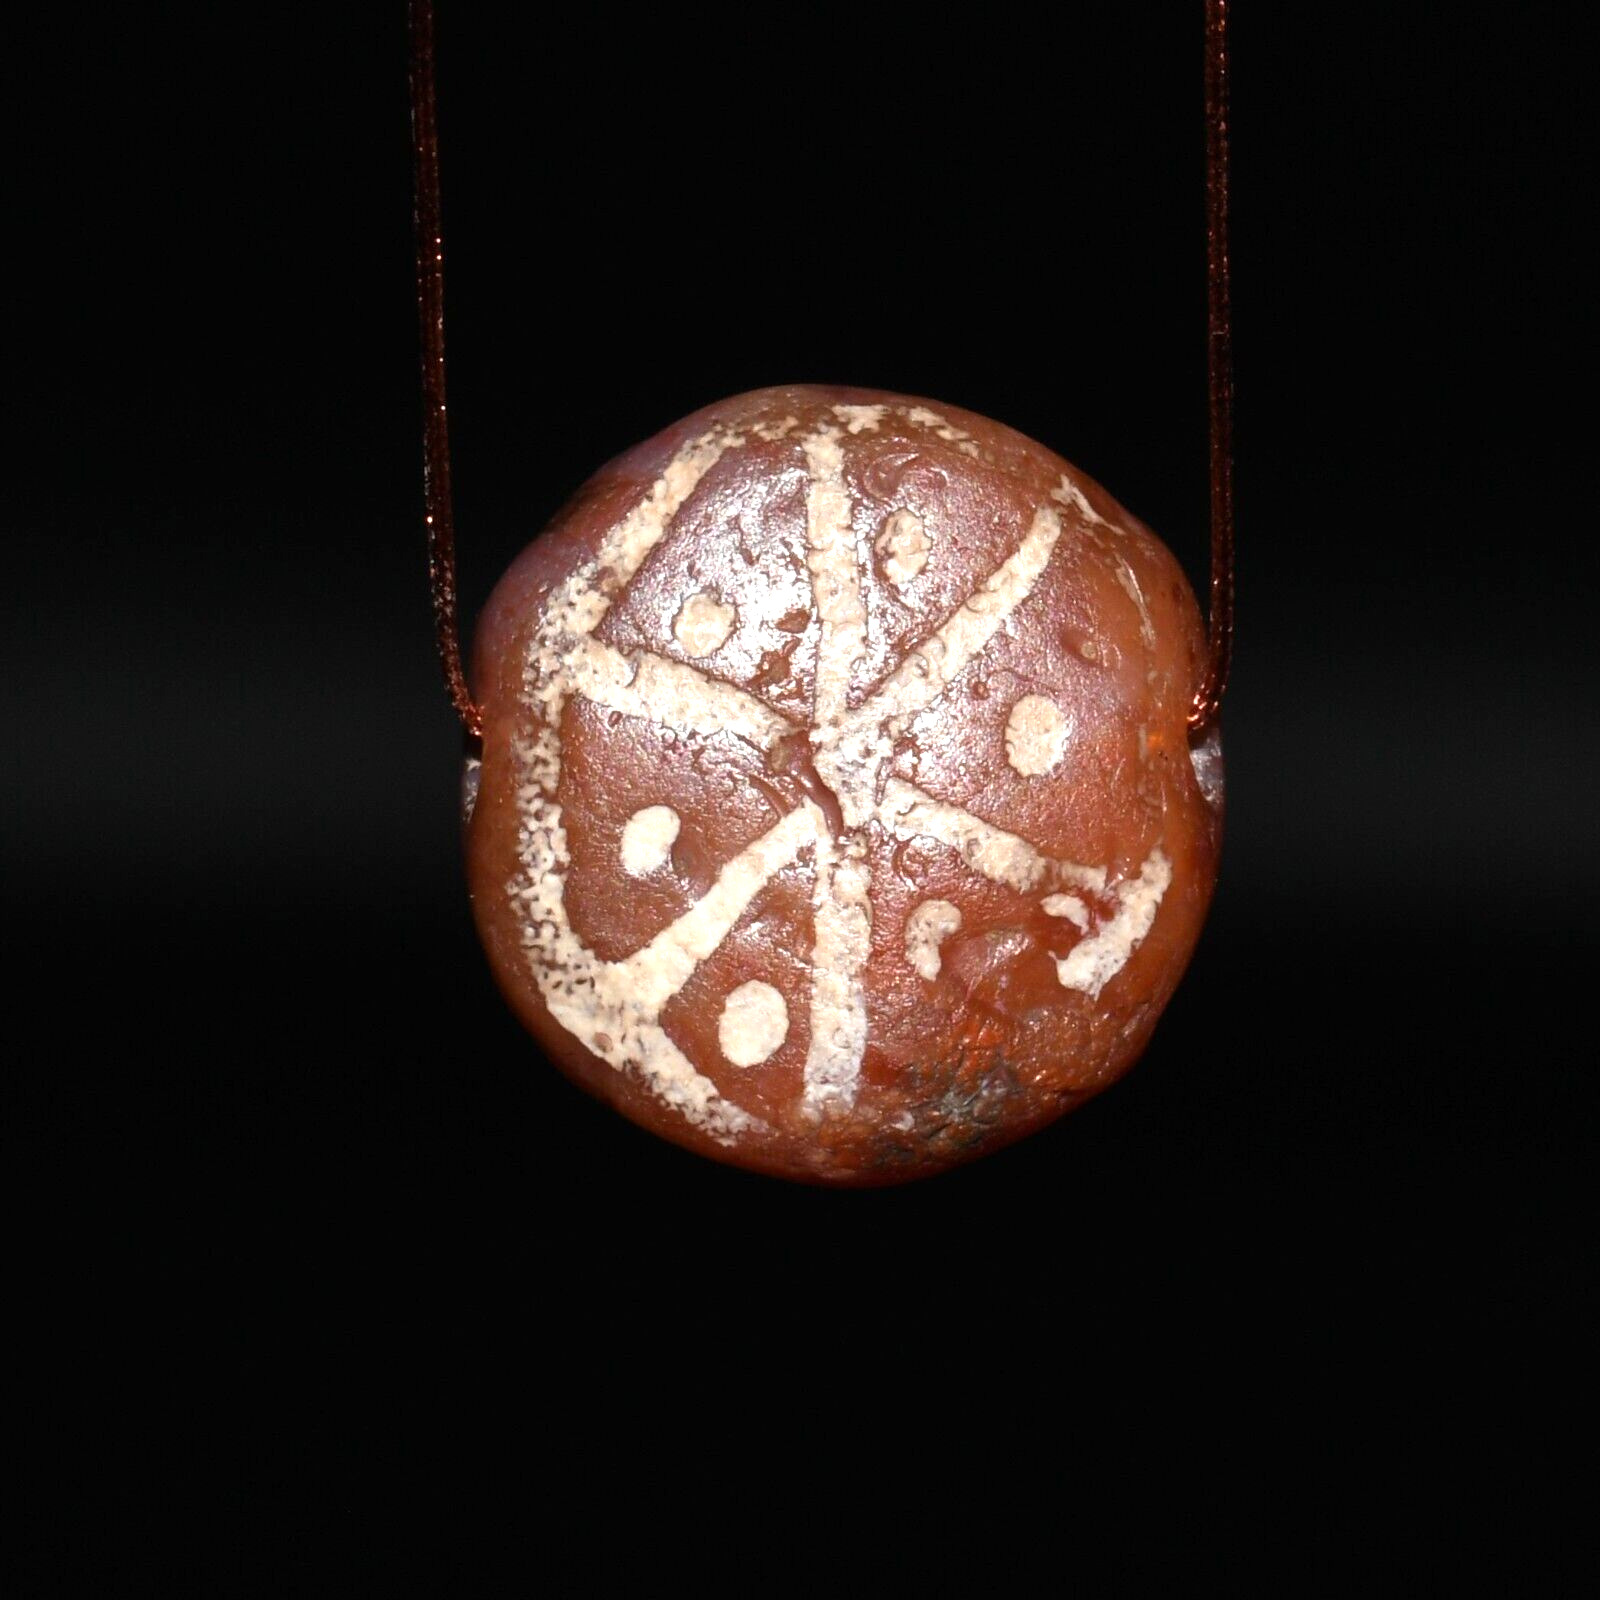 Ancient Indus Valley Etched Carnelian Bead with Decorated Patterns 2600-1700 BCE